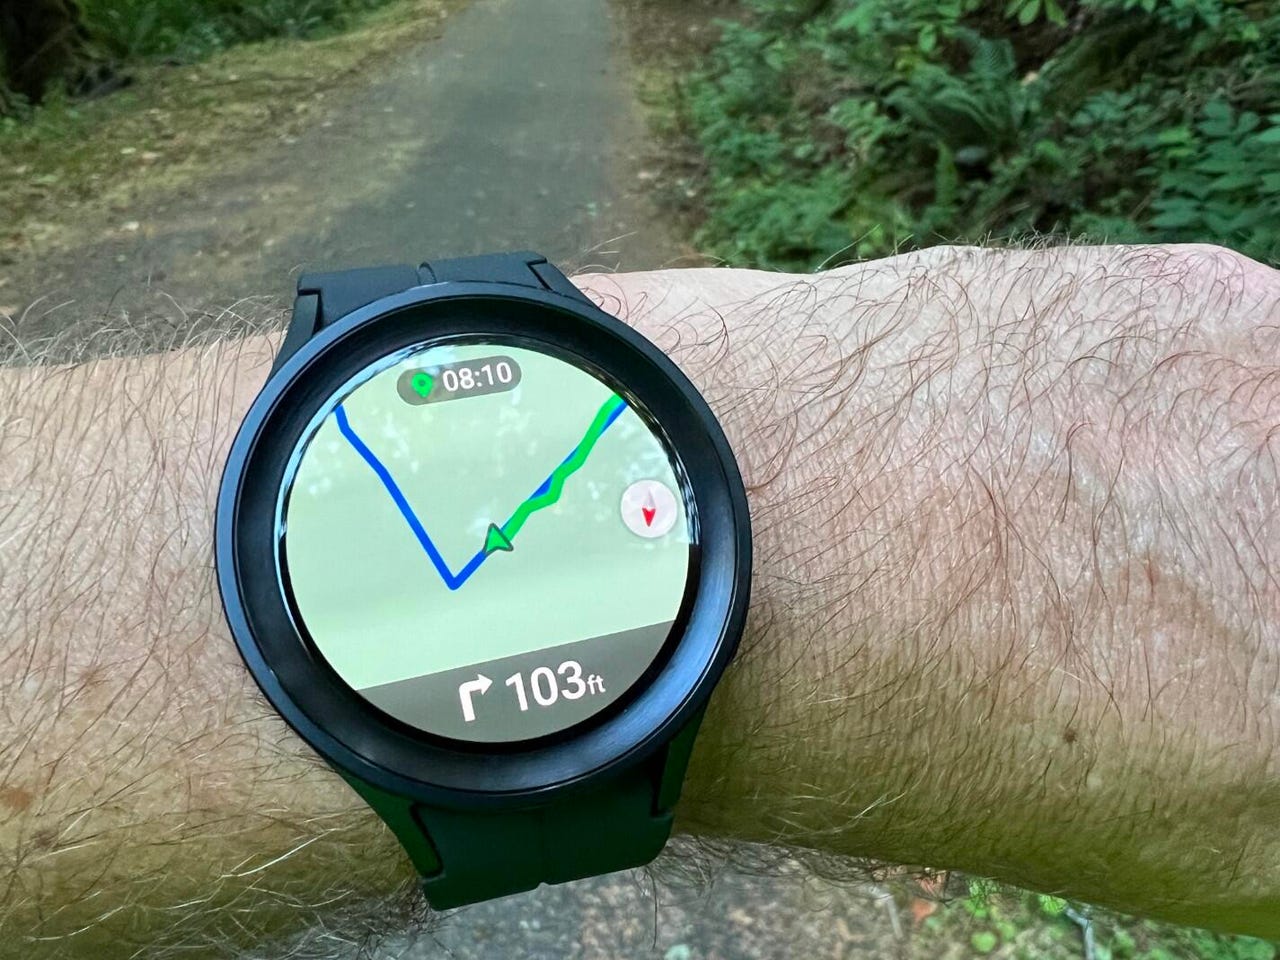 godkende afdeling reference How to use the Route tile on the Samsung Galaxy Watch 5 Pro | ZDNET